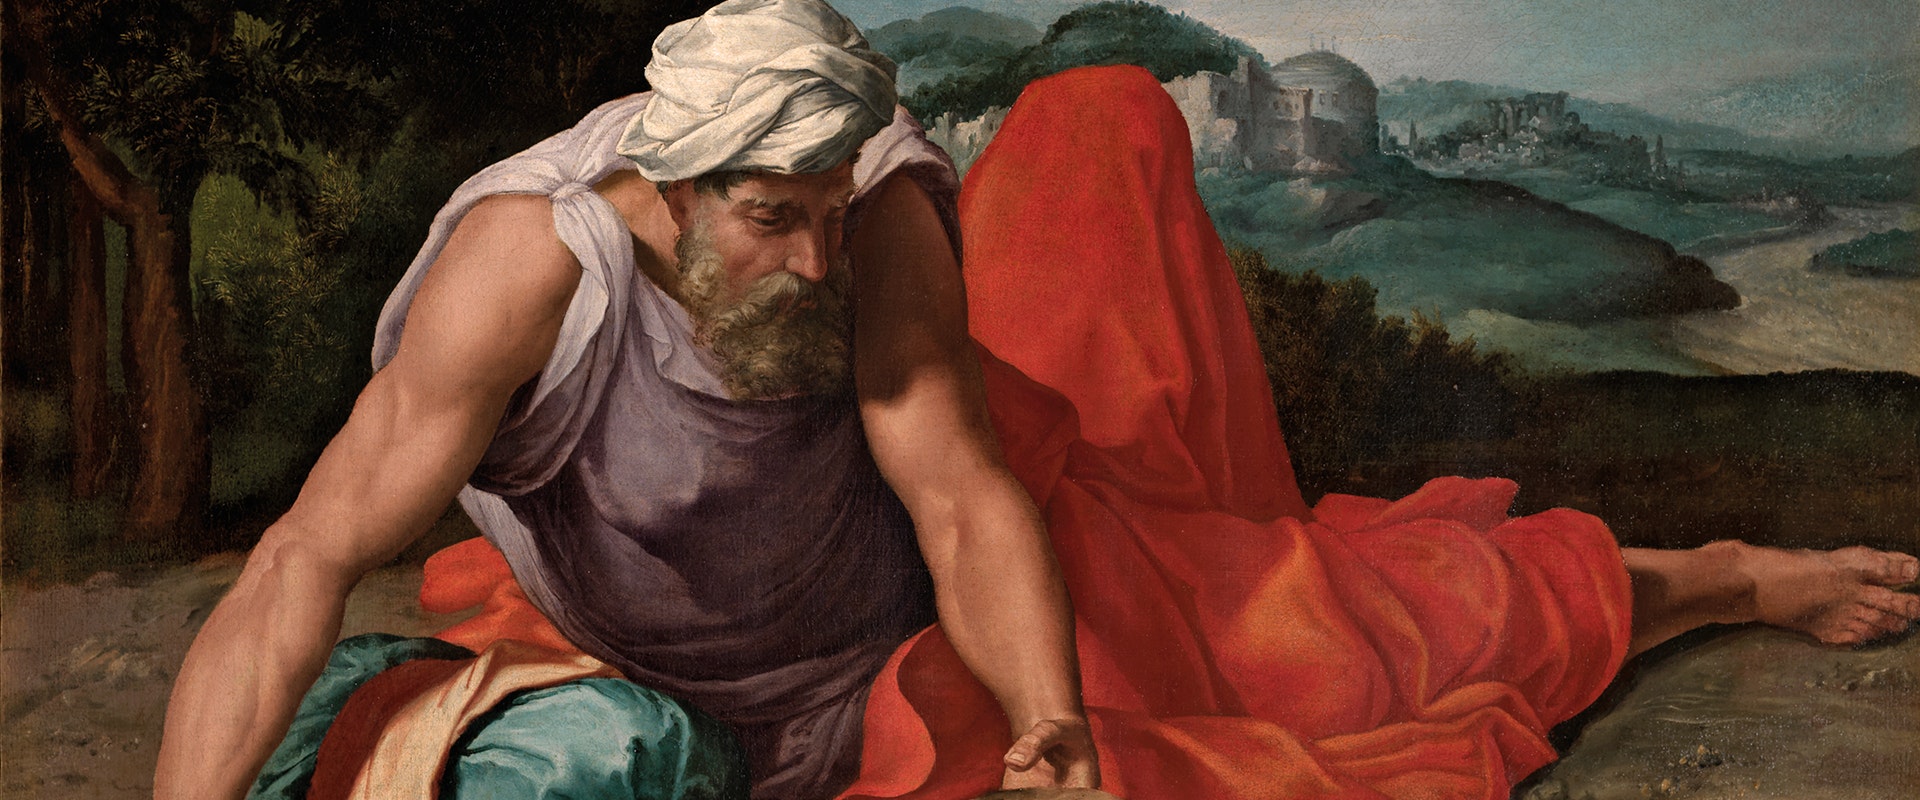 A 16th-century masterpiece enters the Uffizi's collection: "Elijah in the desert"